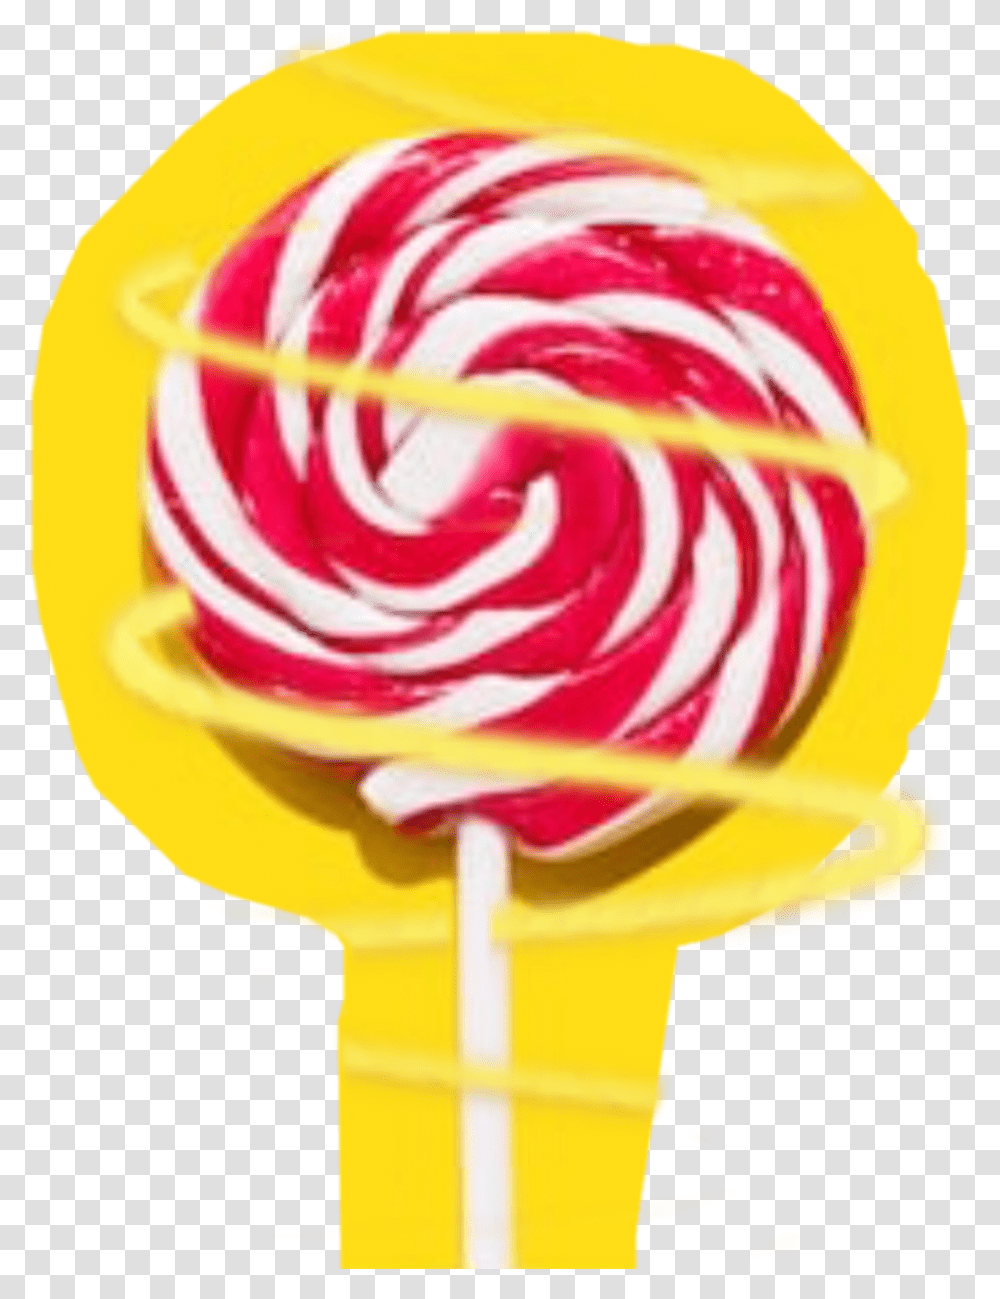 Lollipop Lollipopi Actuallyhave Never Had A Lollipop Lollypop, Food, Sweets, Confectionery, Candy Transparent Png